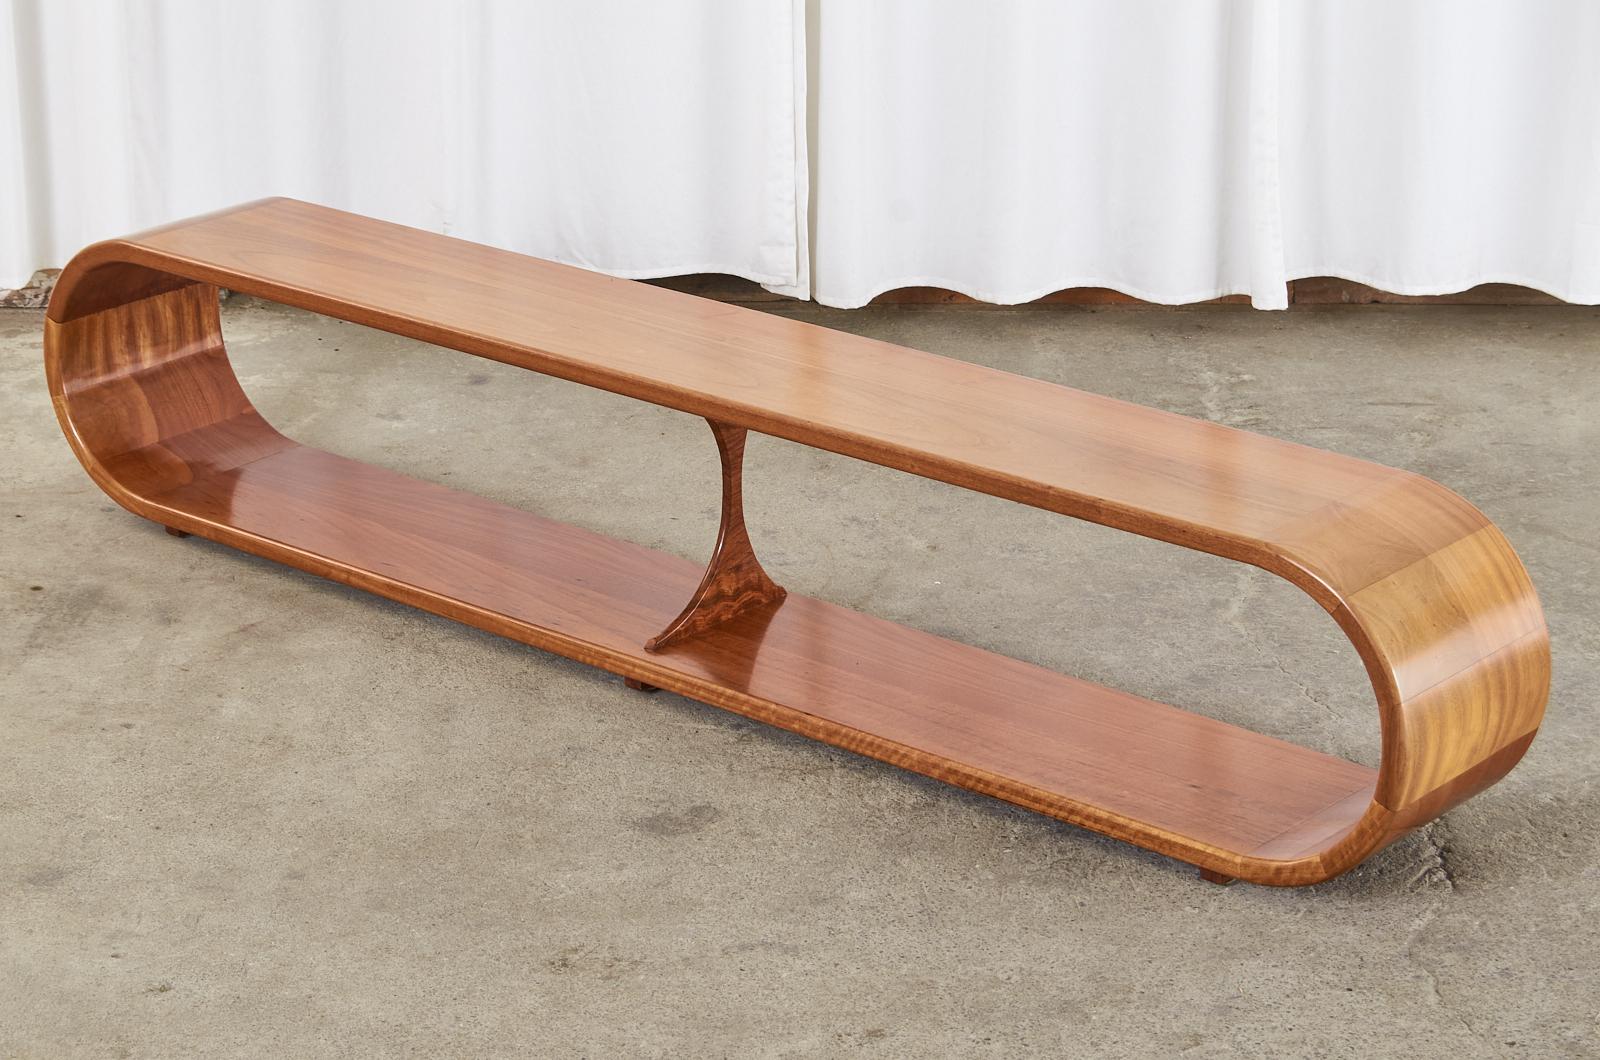 Amazing large modern infinity waterfall cocktail coffee table or long bench seat crafted from mahogany. This one of a kind sculptural oval table is made of thick planks of radiant mahogany with shaped pieces making the round ends. Excellent joinery